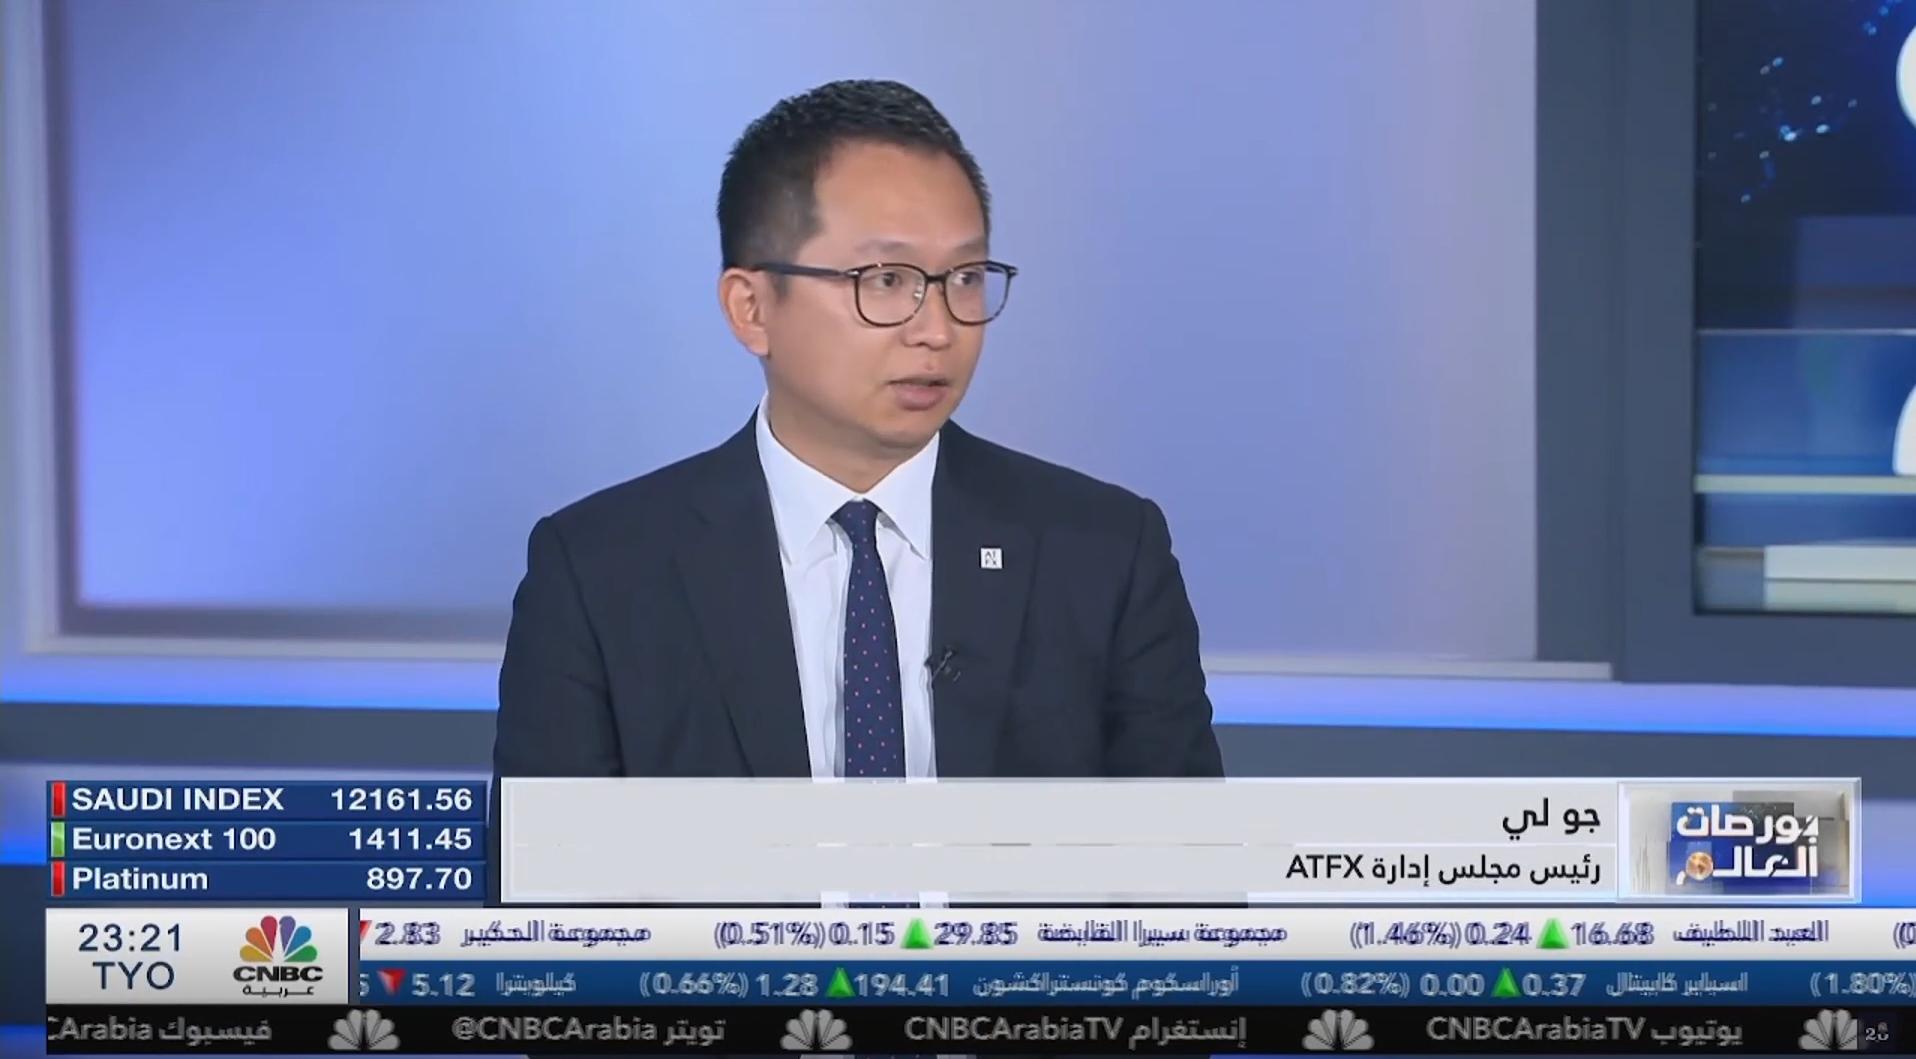 CNBCExclusive interviewsATFXGroup ChairmanJoe LiFocusing on investor needs and building the industry...375 / author:atfx2019 / PostsID:1727697